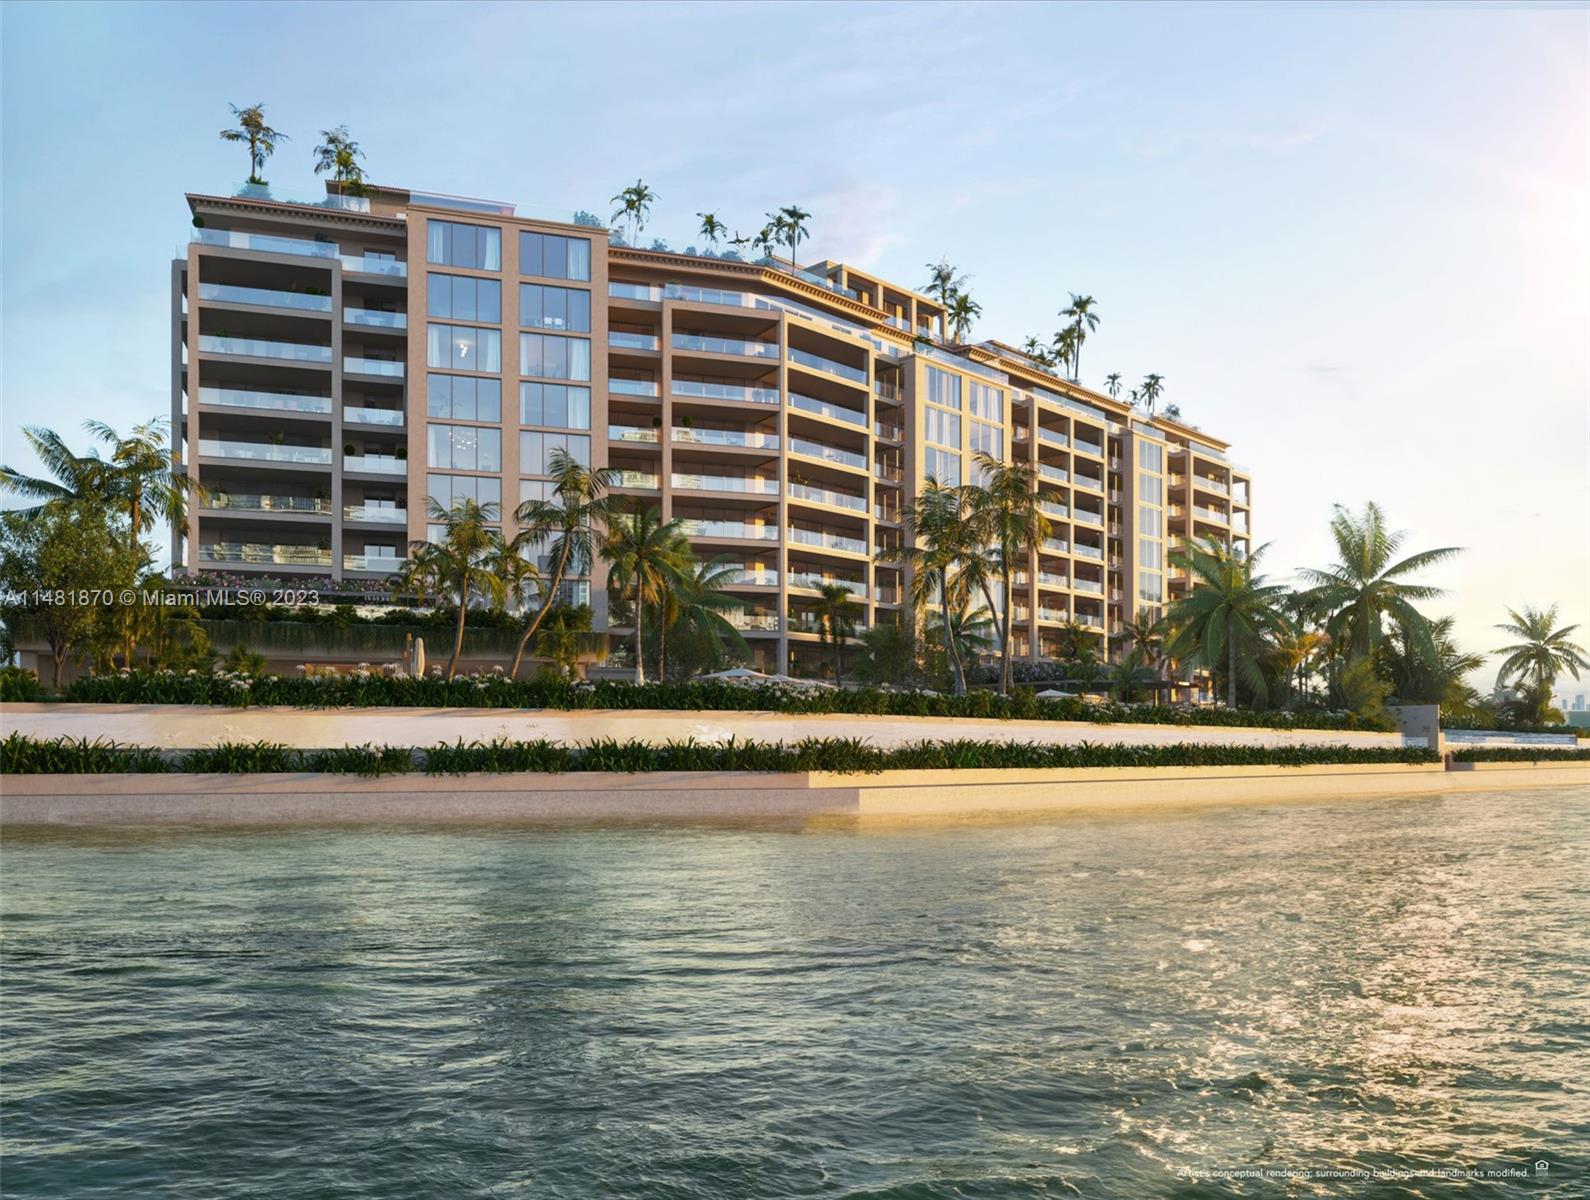 Fewer than 50 waterfront homes, The Residences at Six Fisher Island will be the last new construction project built on the ultra-private island. Owners will enjoy membership to Fisher Island Club with access to beach club, golf course and more. Six Fisher’s on-site, residents-only amenities include two pools, restaurant with Chef’s Table and cocktail lounges, padel court, private dock with house tender, guest suites, boardroom, Sanctuary Spa with world-class fitness center hot/cold plunges, steam/sauna, and salon, among other resort-style offerings. Residences feature refined interiors by world-renowned Tara Bernerd & Partners, 15-ft deep terraces with panoramic water and city views, showpiece kitchens, oversized bayview primary suites, and private elevator foyers with manned lobbies